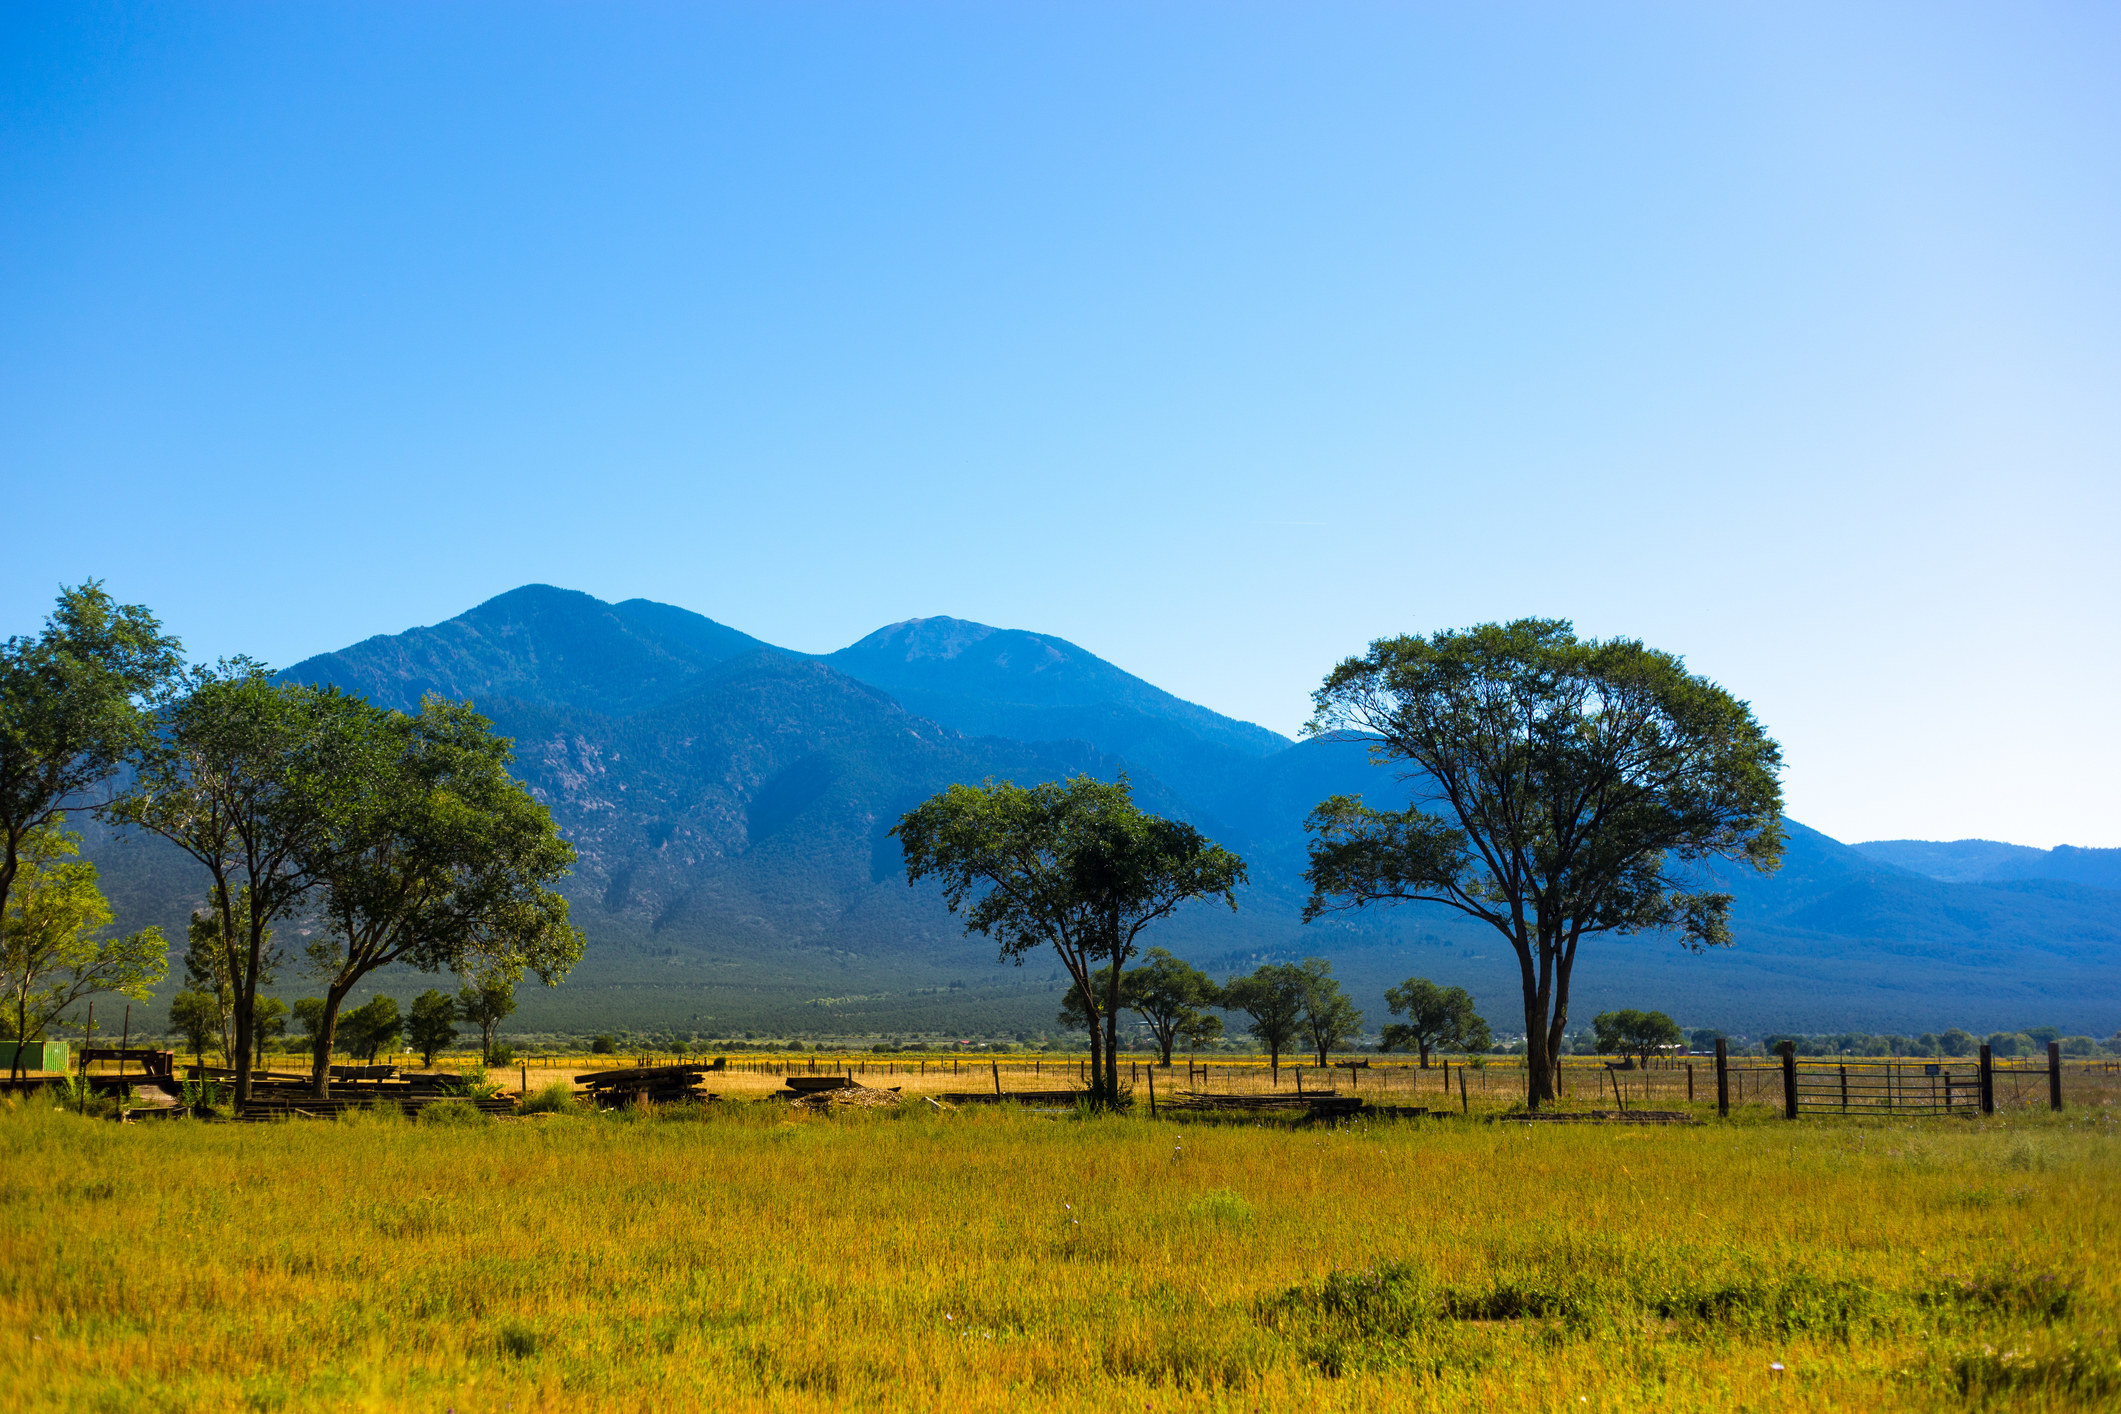 Taos prairie with trees and mountains.